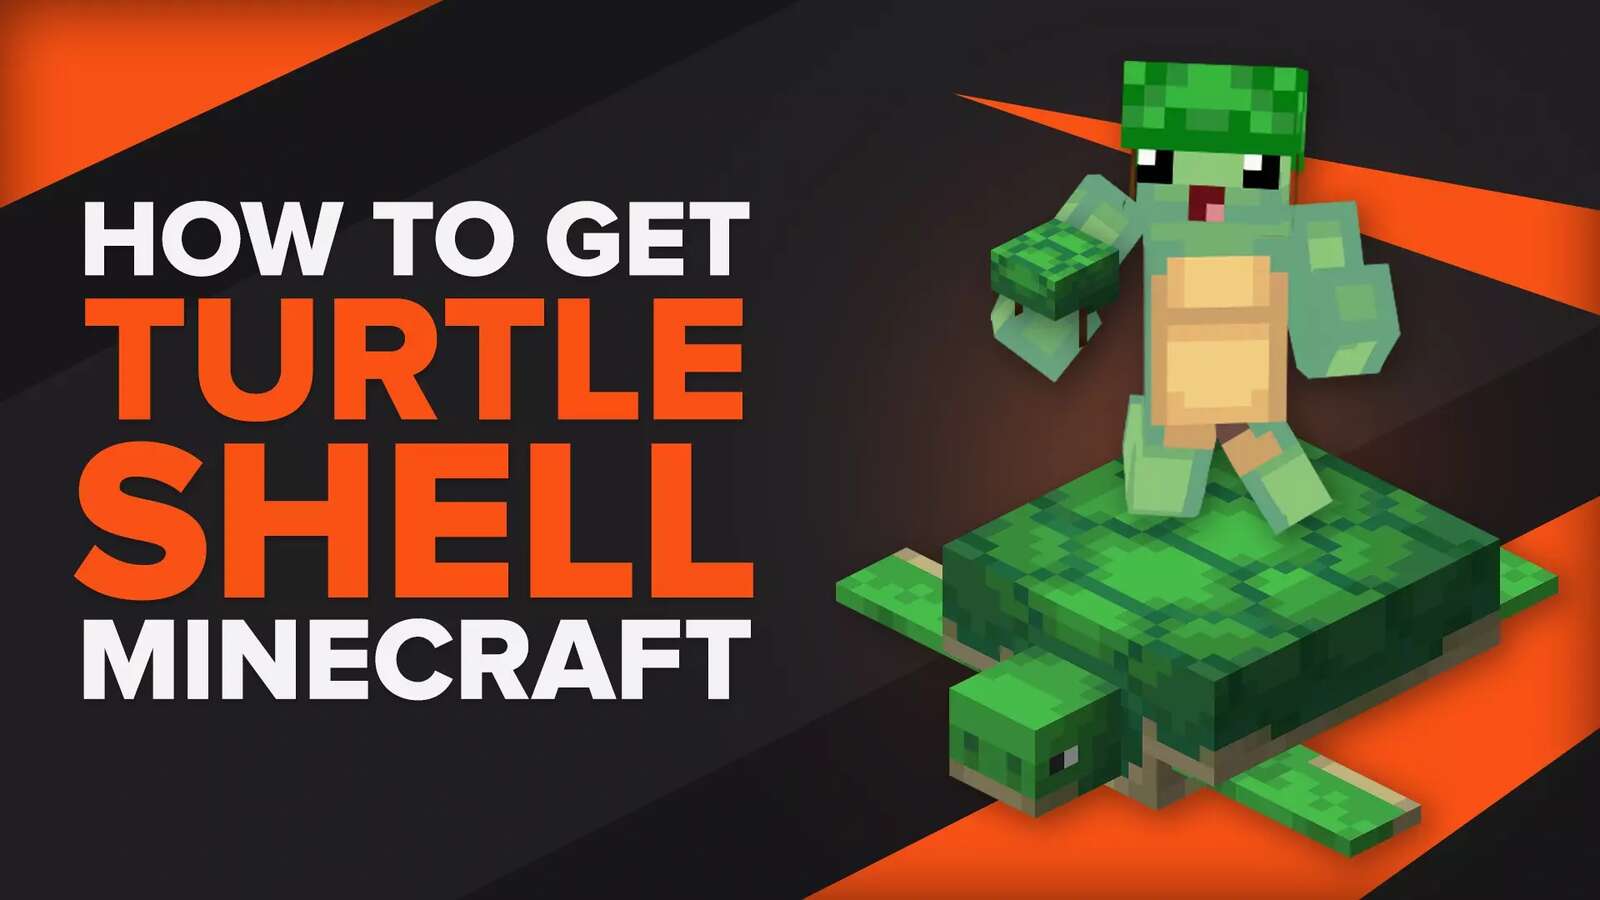 How to Get a Turtle Shell in Minecraft [Crafting Guide]